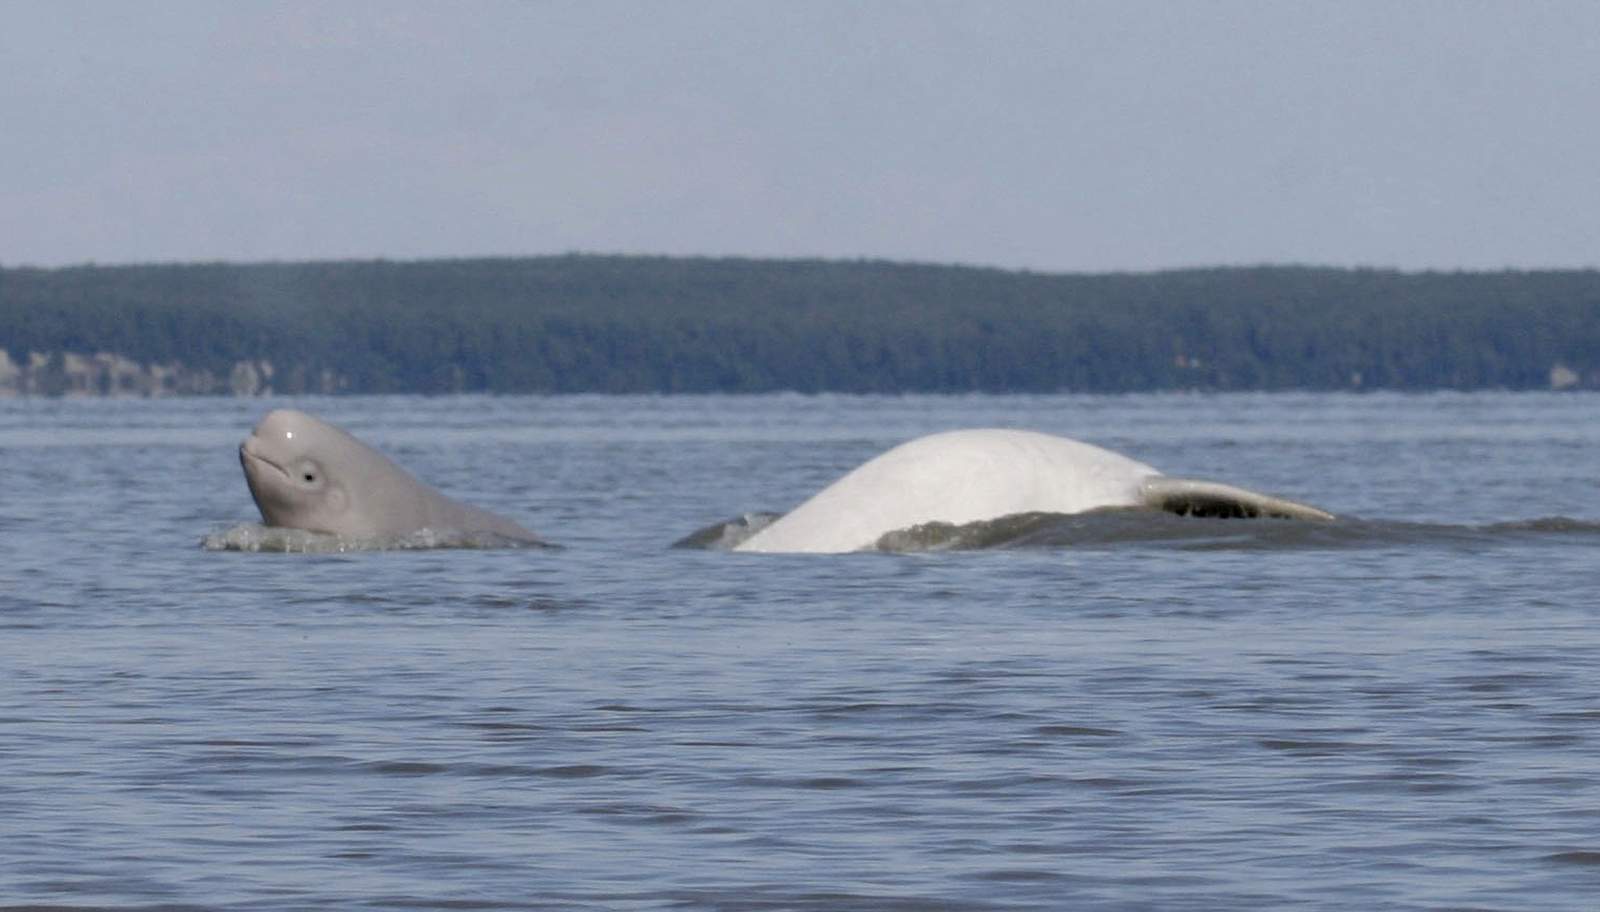 Groups give notice they will sue to protect beluga whales